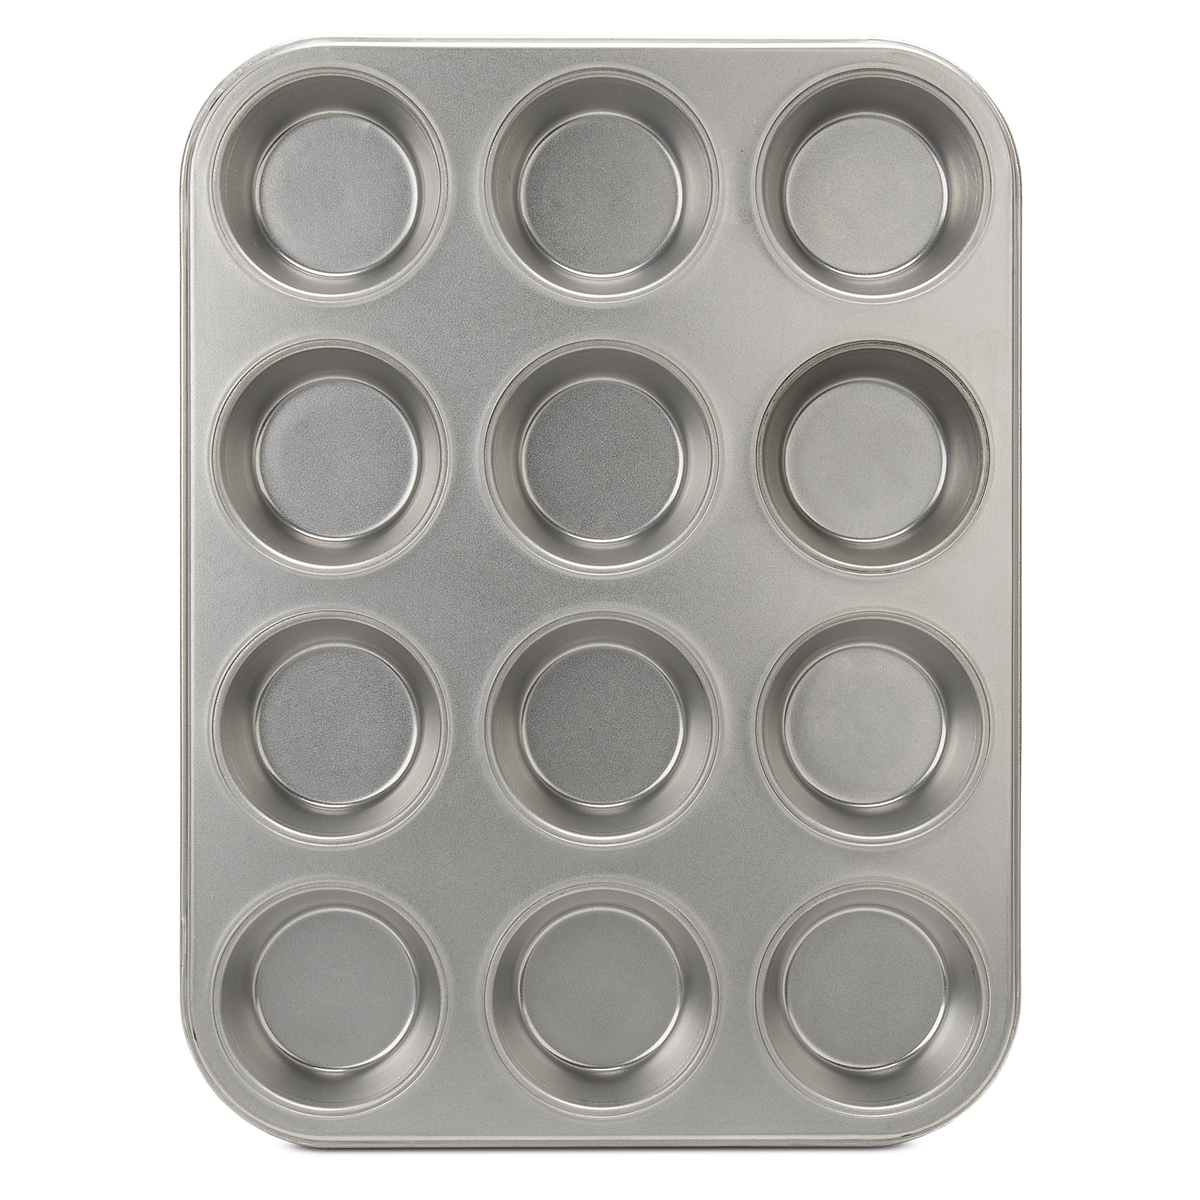 Product photo, top view, 12 cup muffin pan.